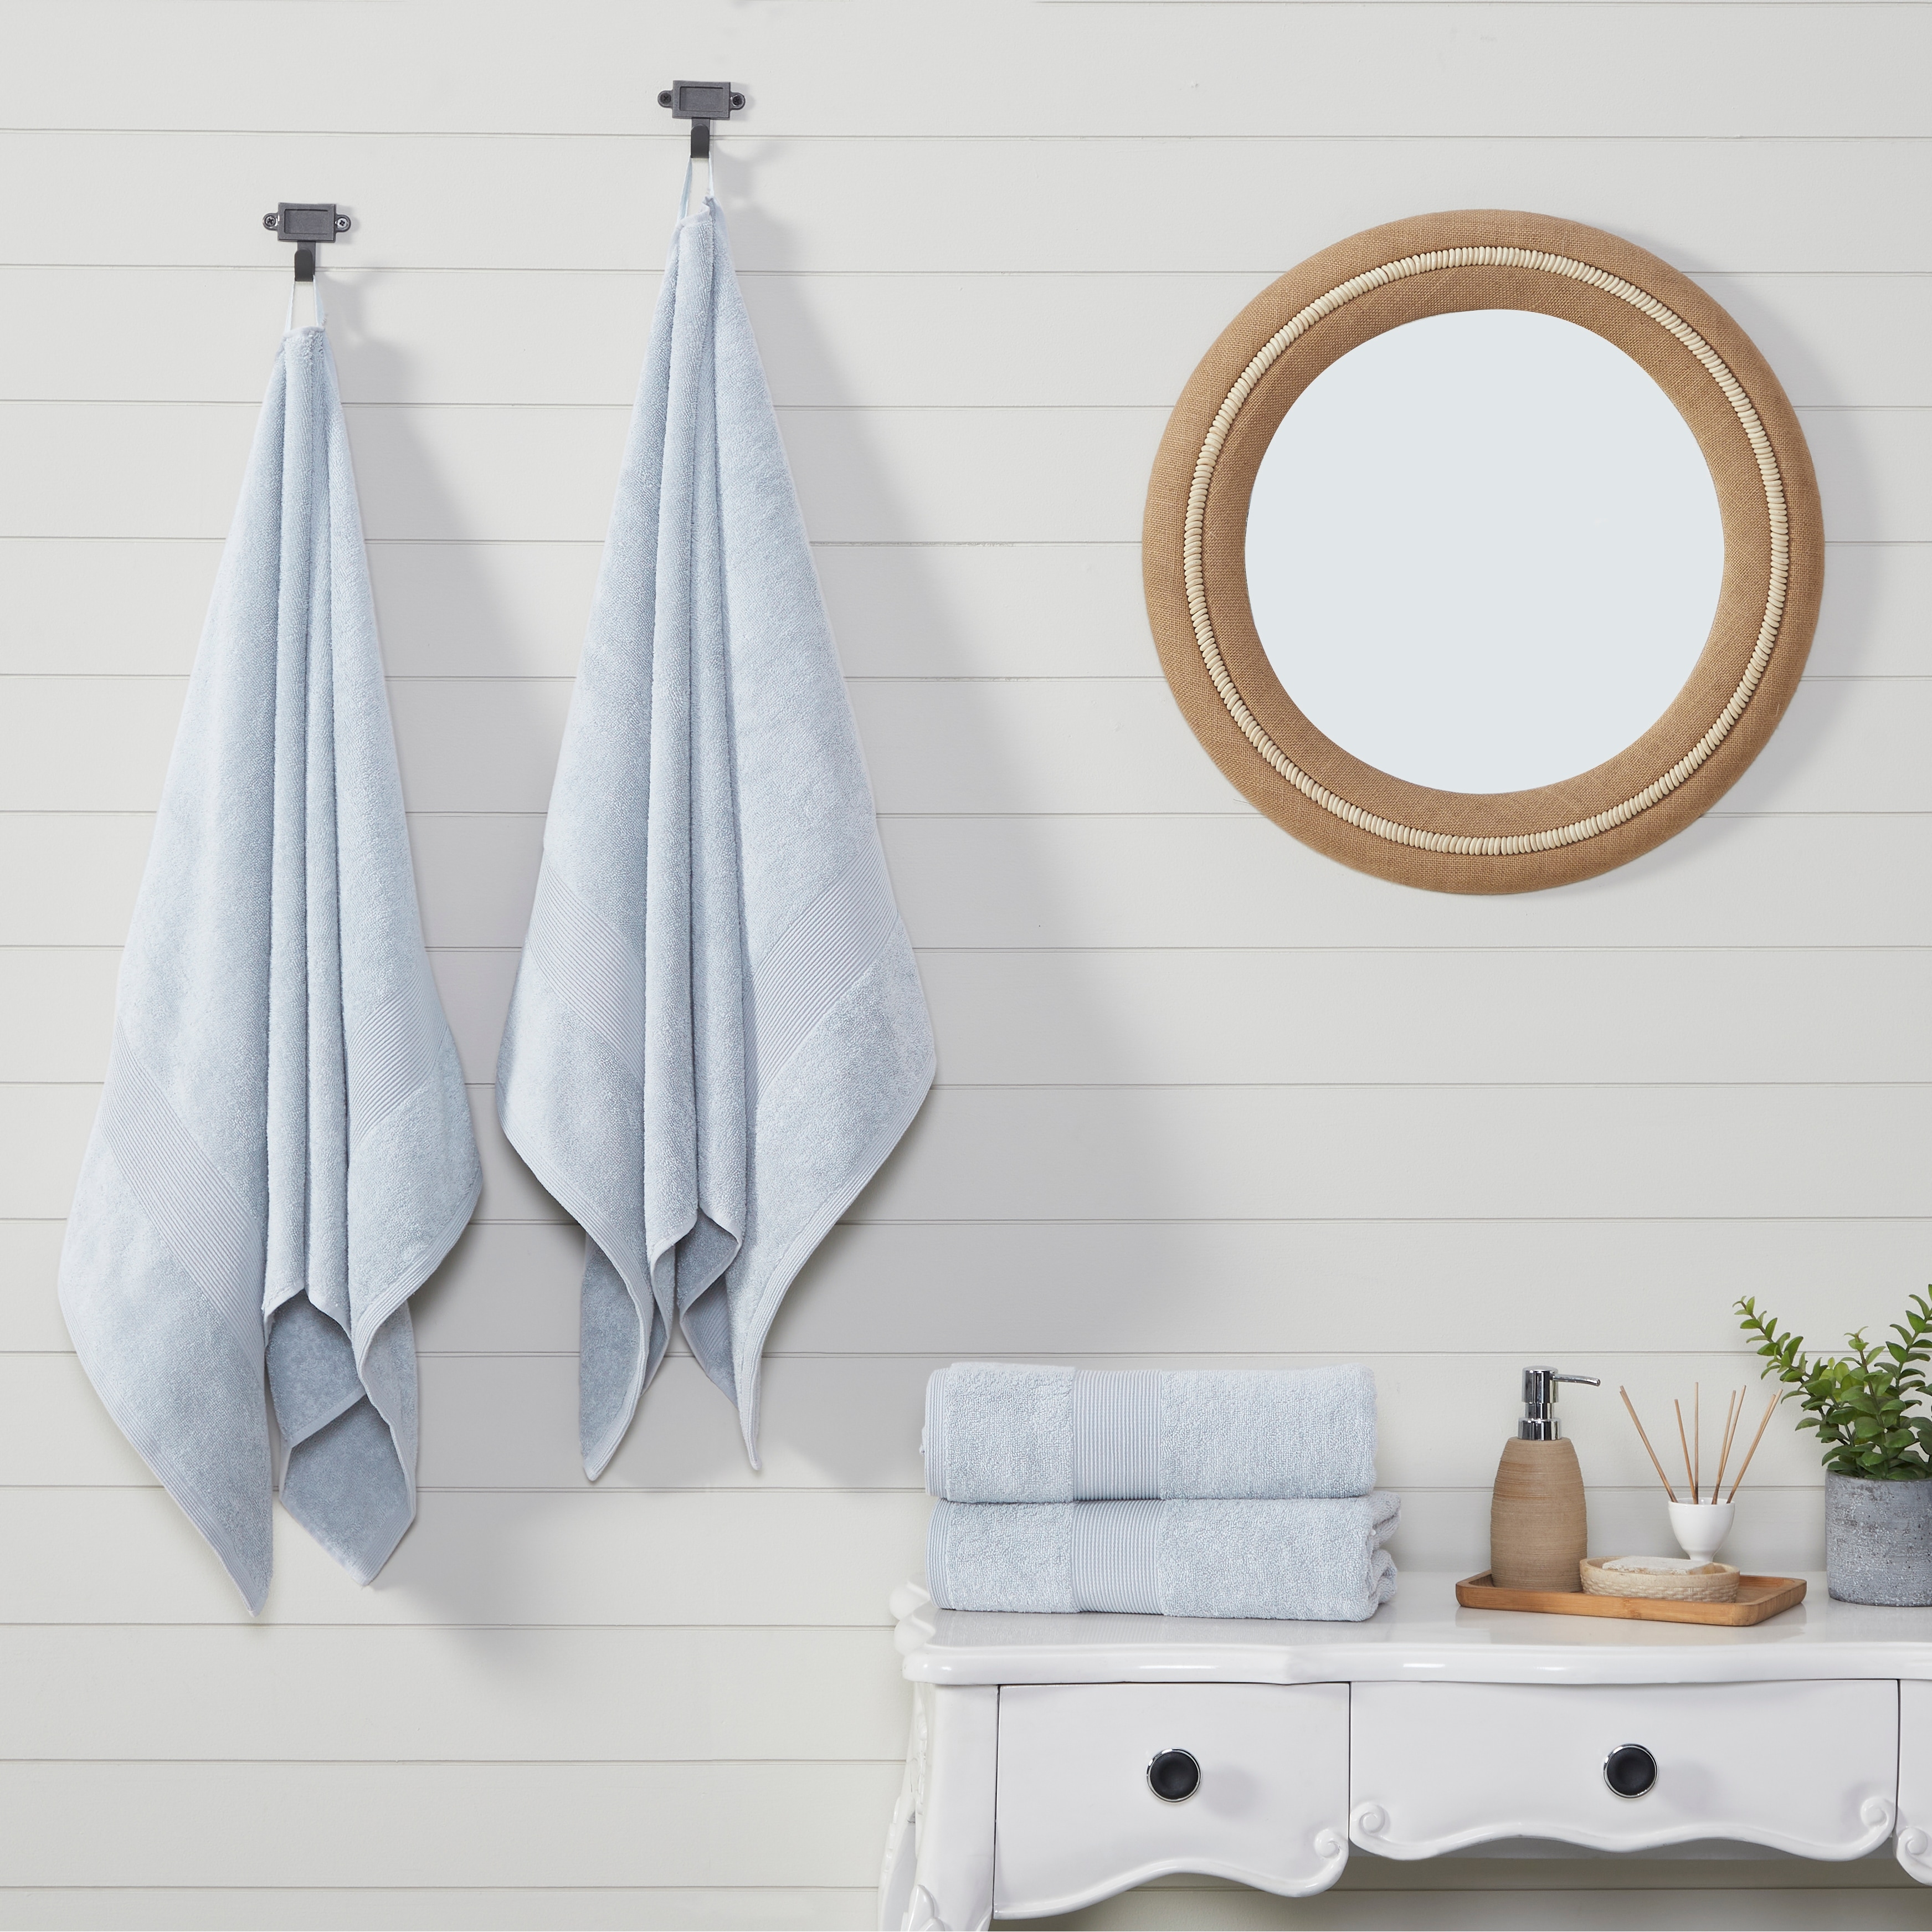 https://ak1.ostkcdn.com/images/products/is/images/direct/2a4b0501335b37aeea0f9f1b995b518dff77cd42/Fabstyles-Super-Soft-and-Absorbent-Bath-Towel%2C-27-x-54-Inches%2C-Set-of-4.jpg